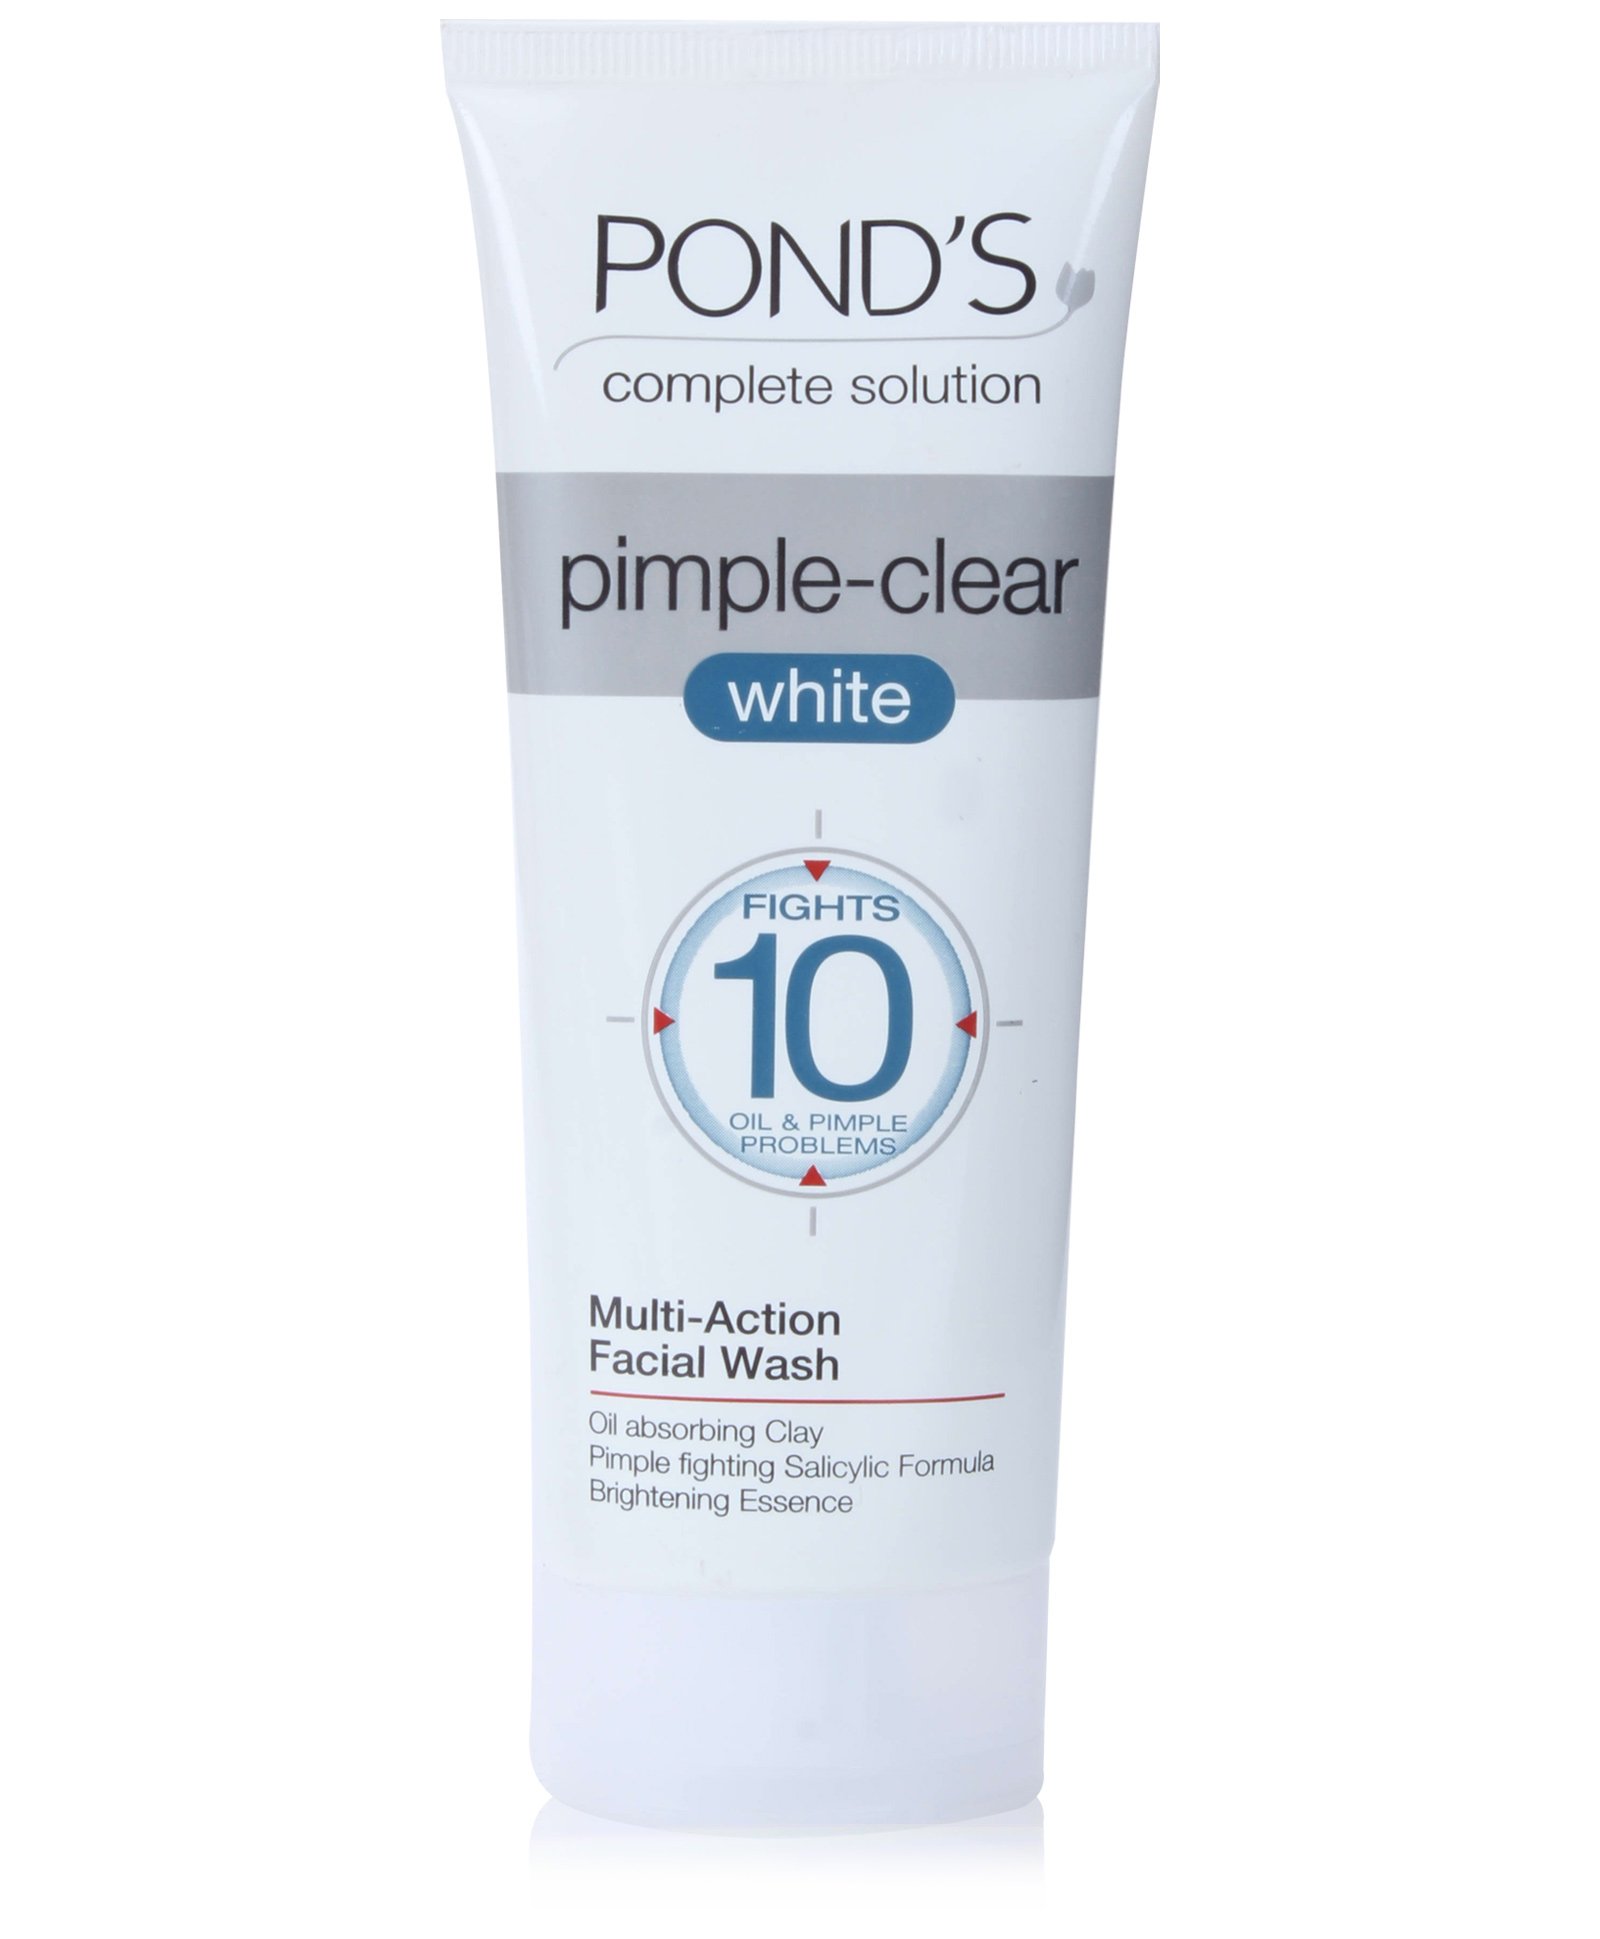 Overview : This face wash is best suited for oily and acne-prone skin.